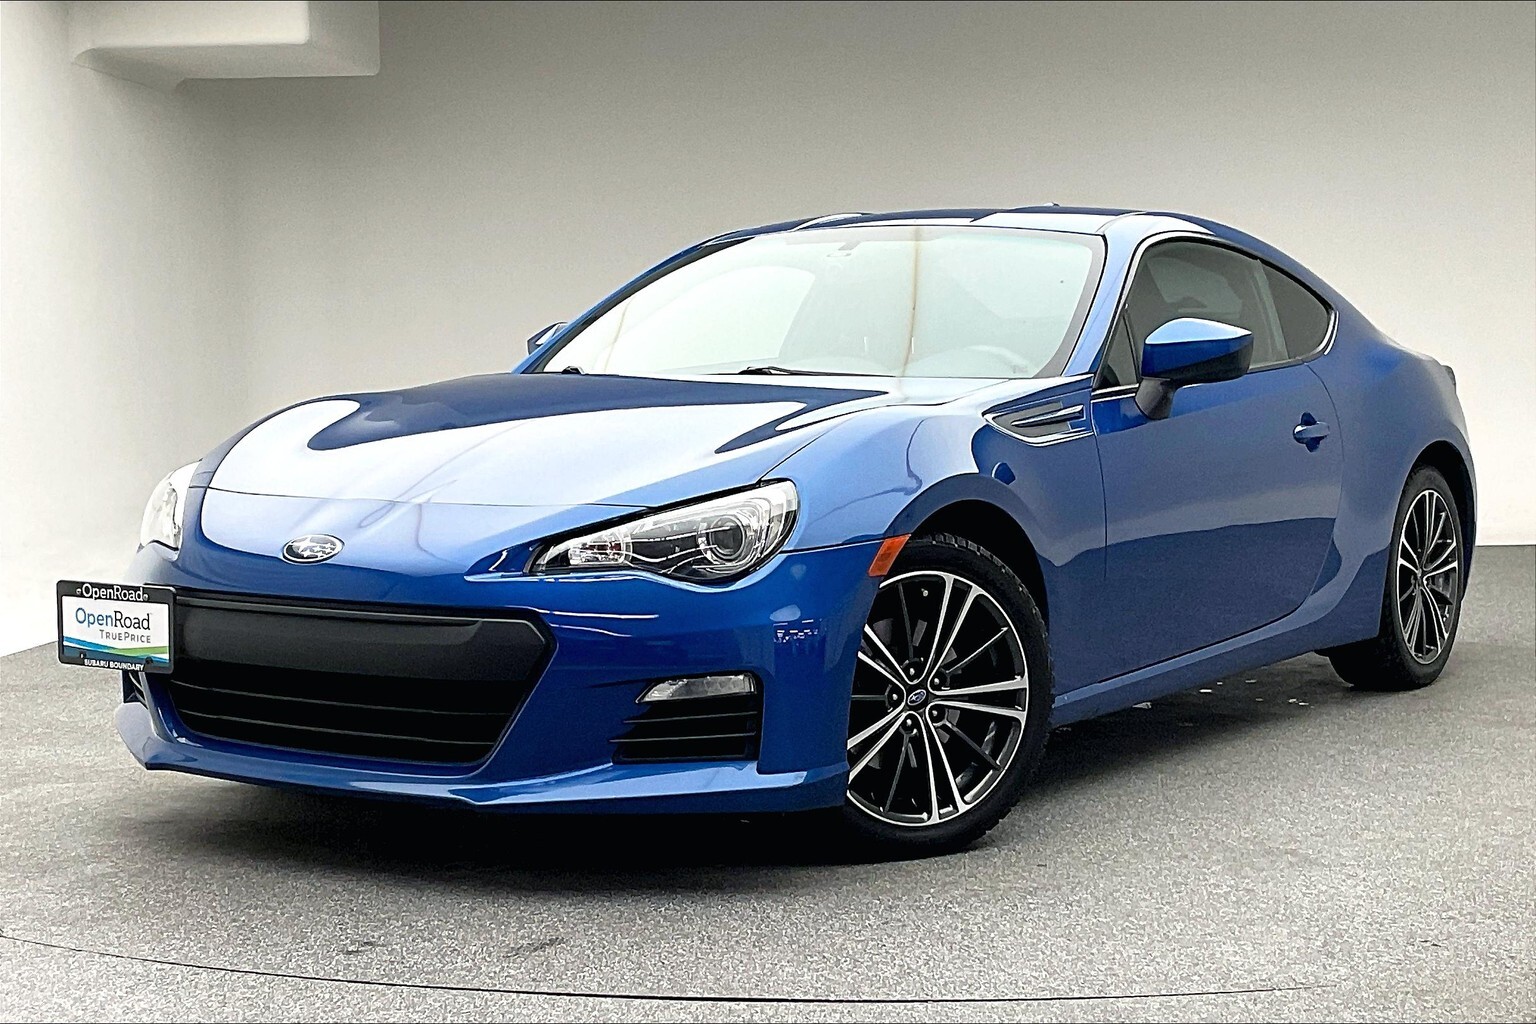 2016 Subaru BRZ 6sp Comes with extra set of wheels